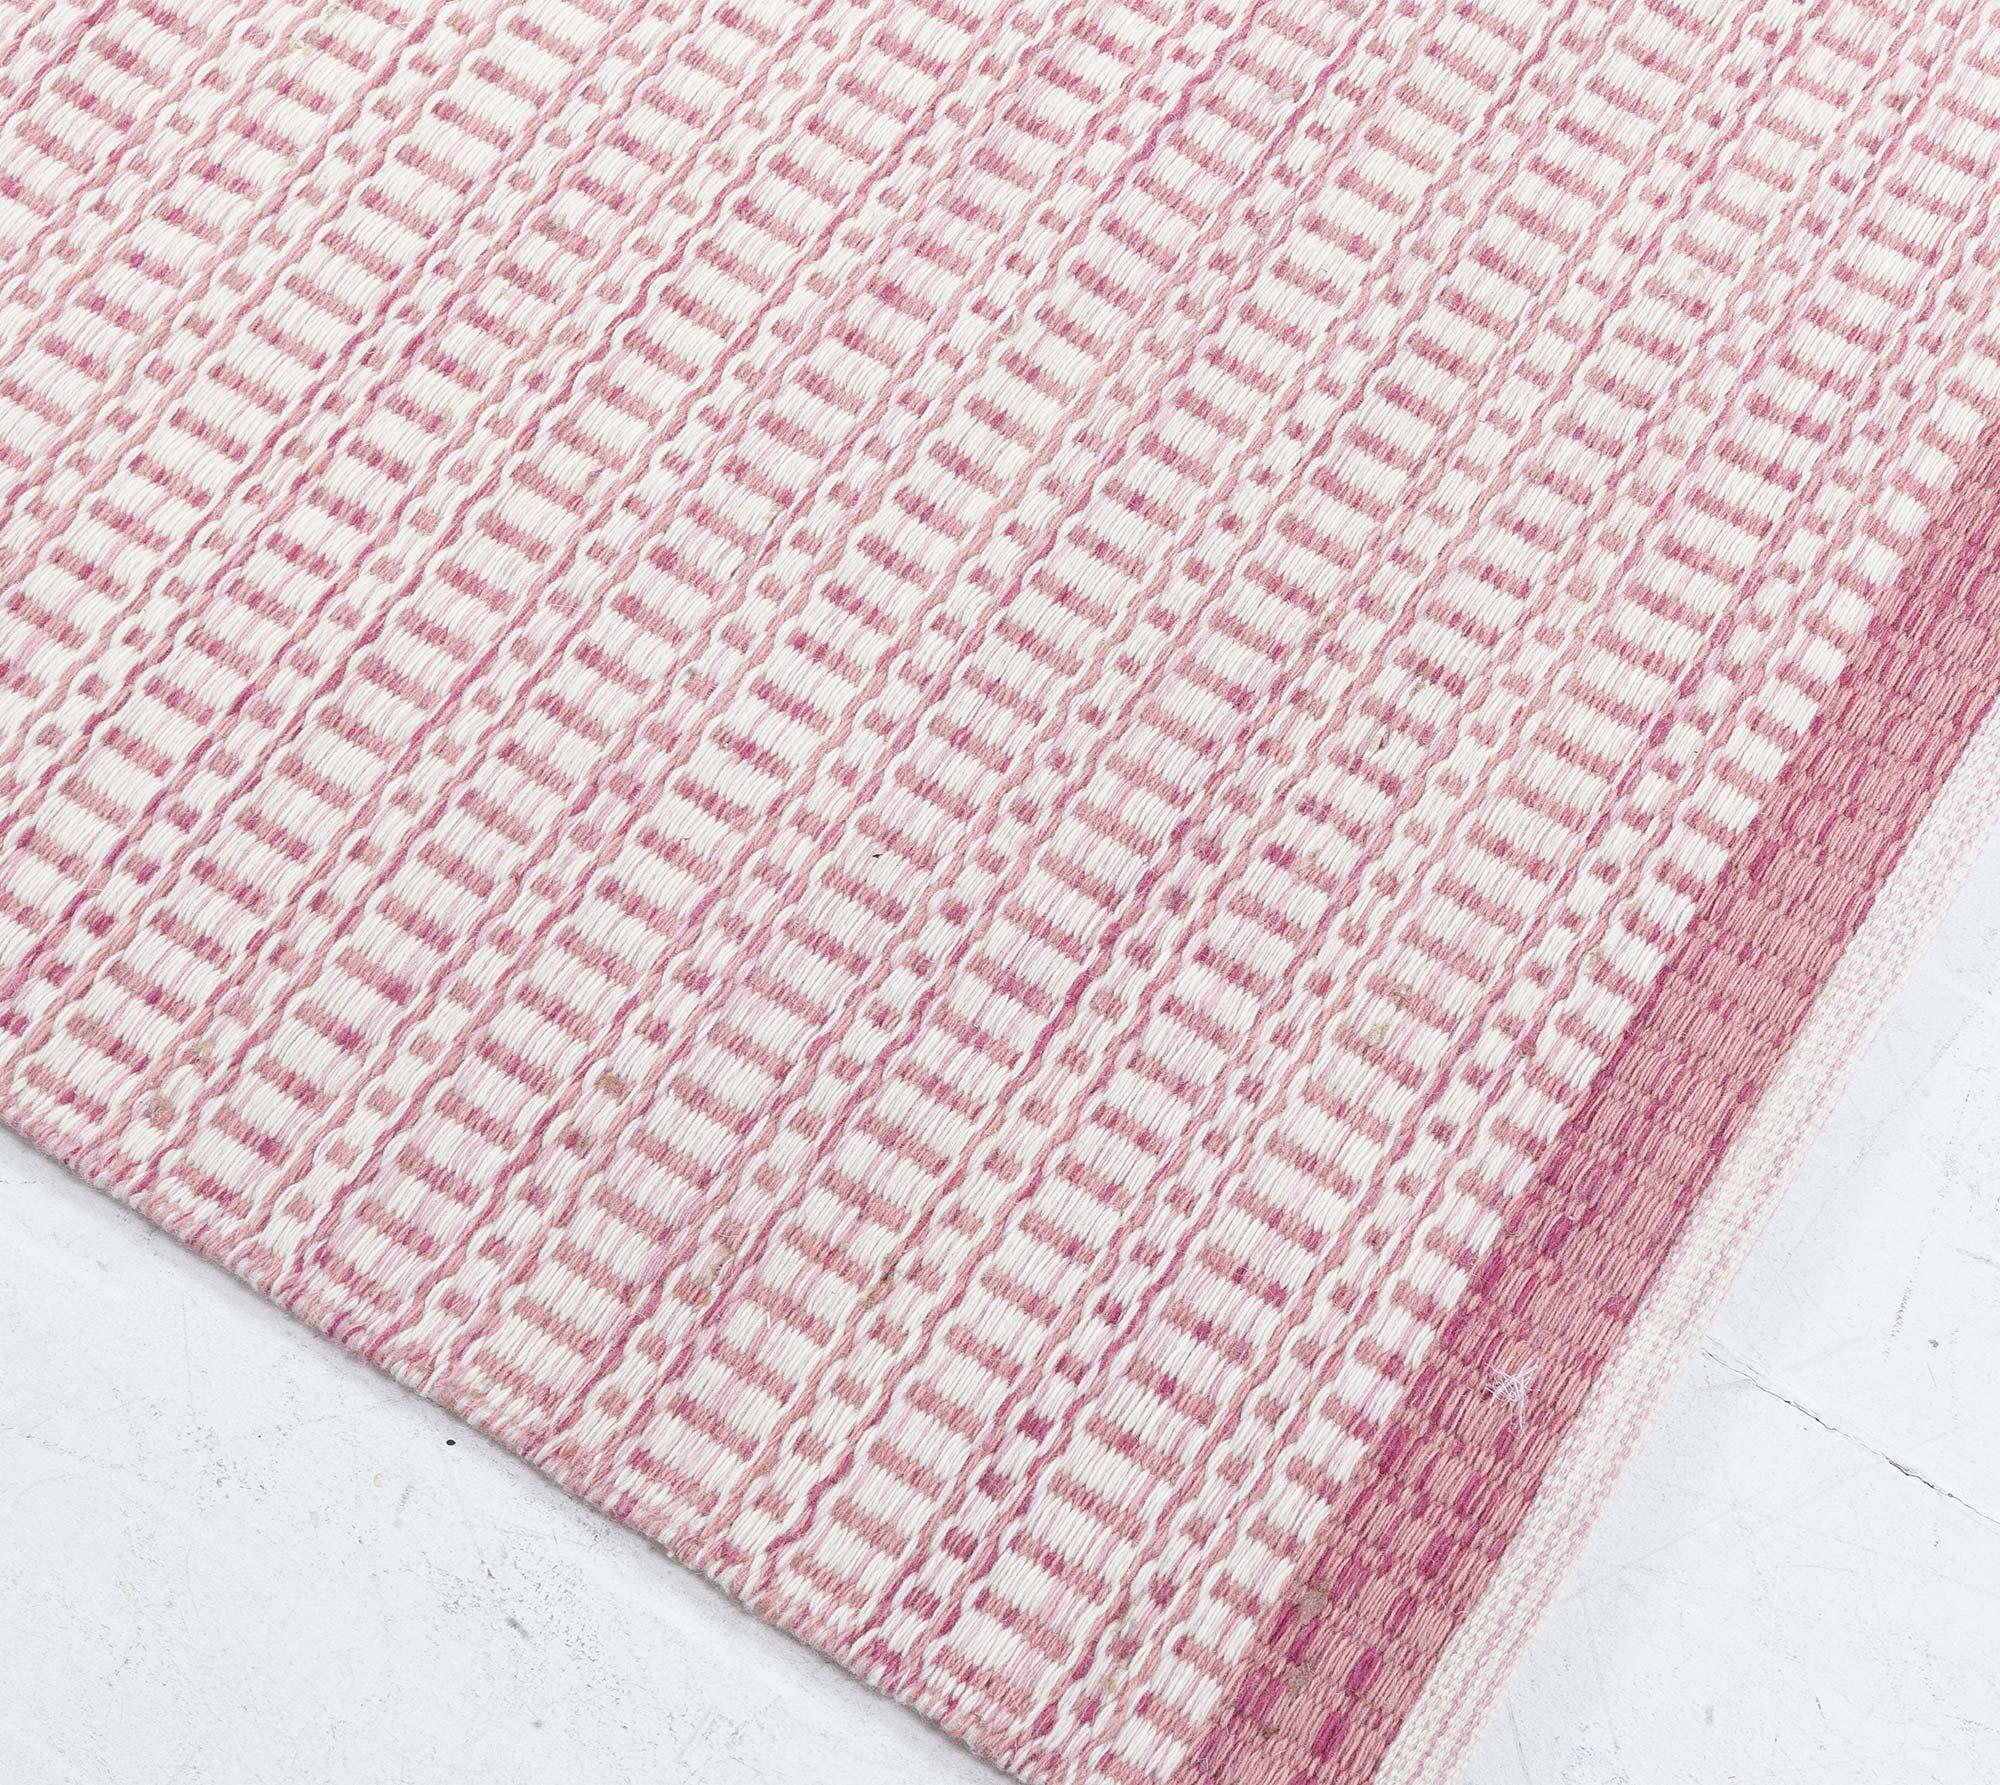 Contemporary Modern Pink and Beige Flat Weave Rug by Doris Leslie Blau For Sale